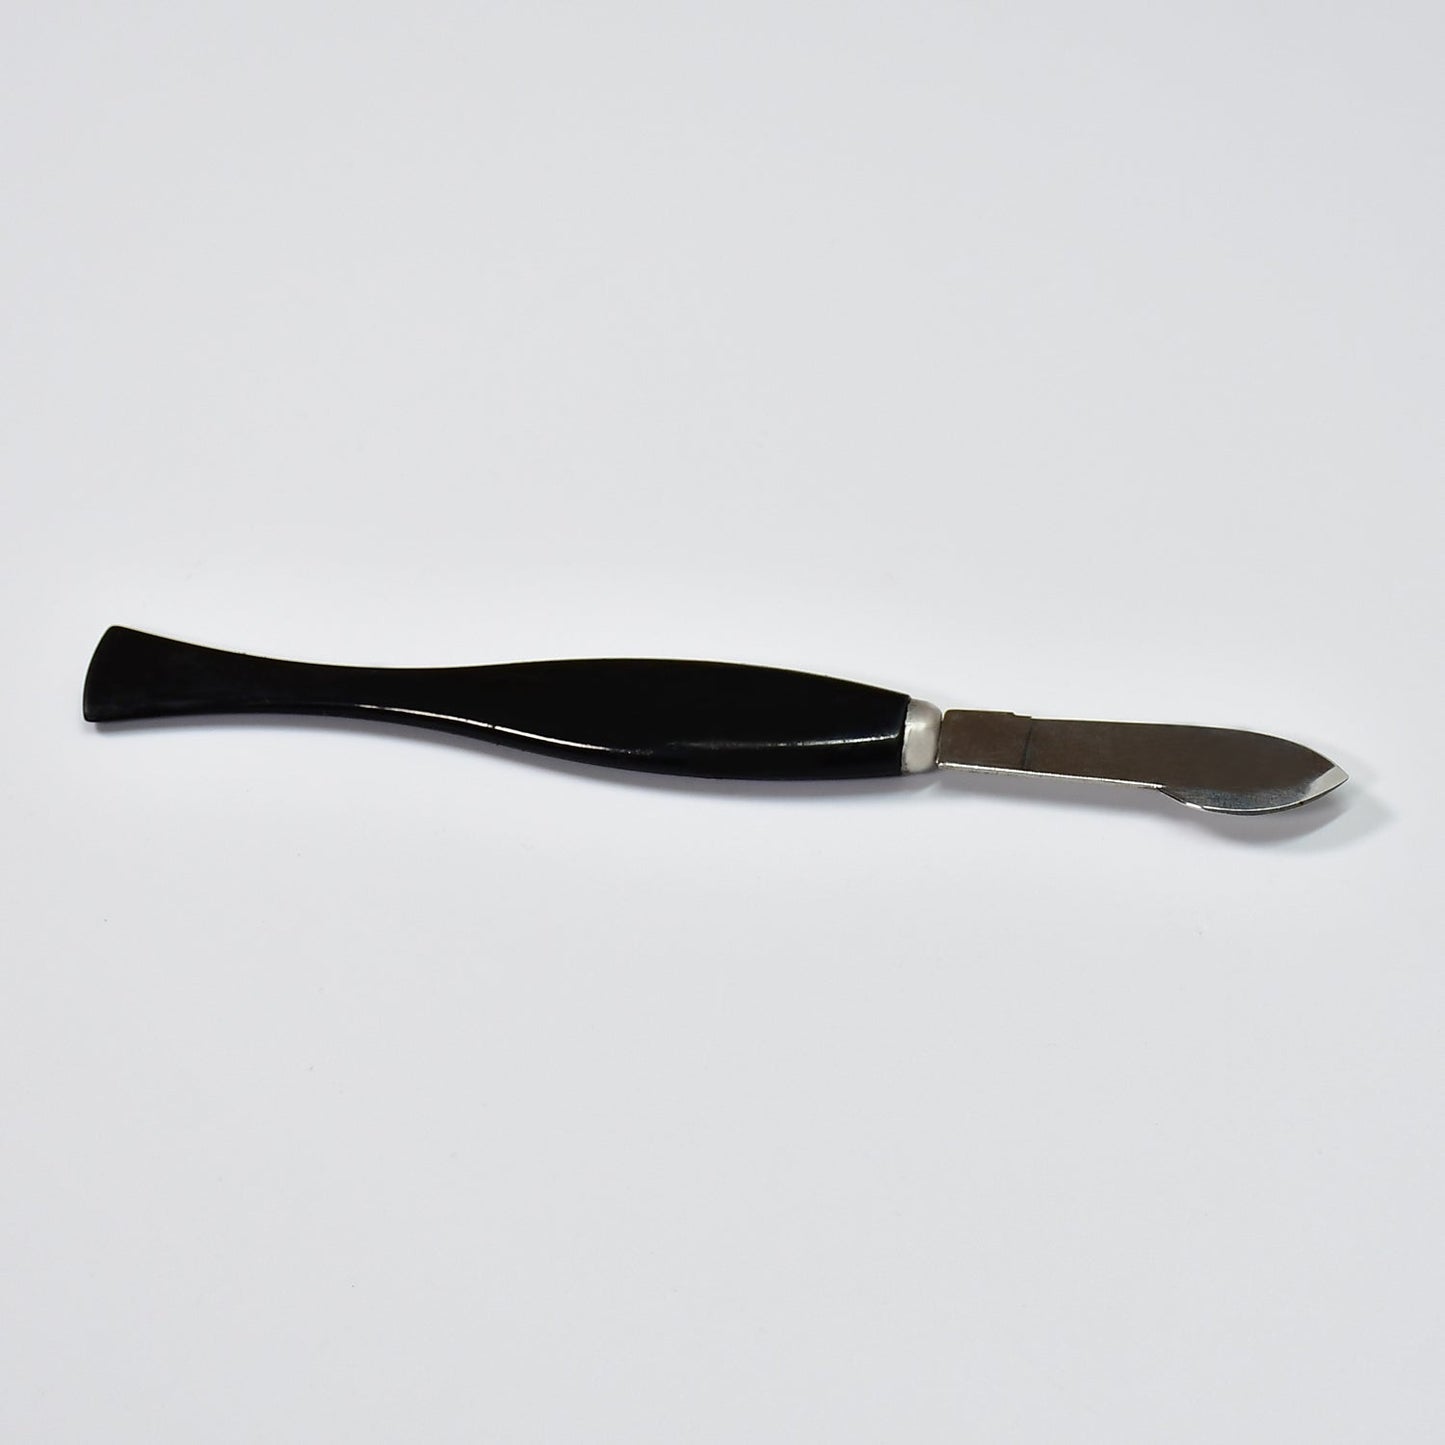 6323 Surgical Blade Carbon Steel Scalpel Blade, with handle. DukanDaily